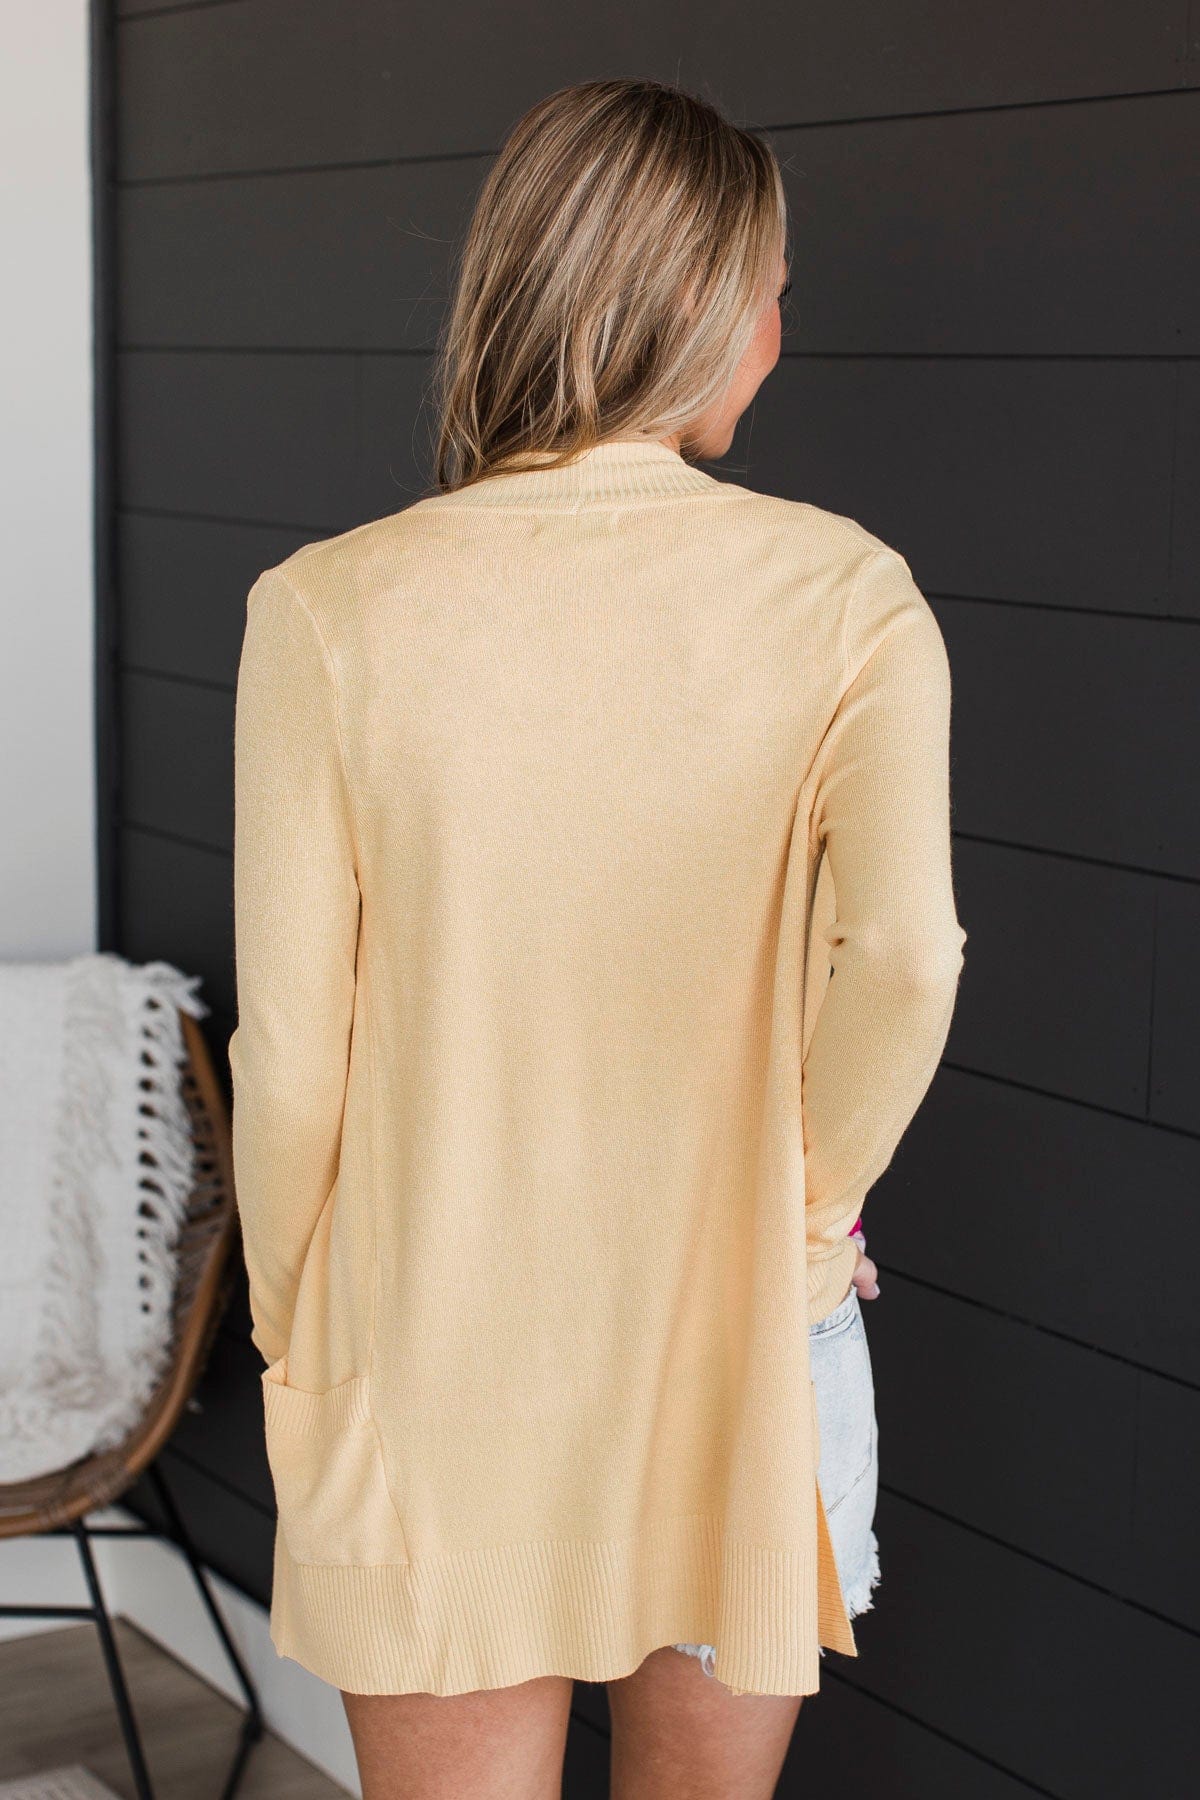 Comfortable With Myself Knit Cardigan- Light Yellow